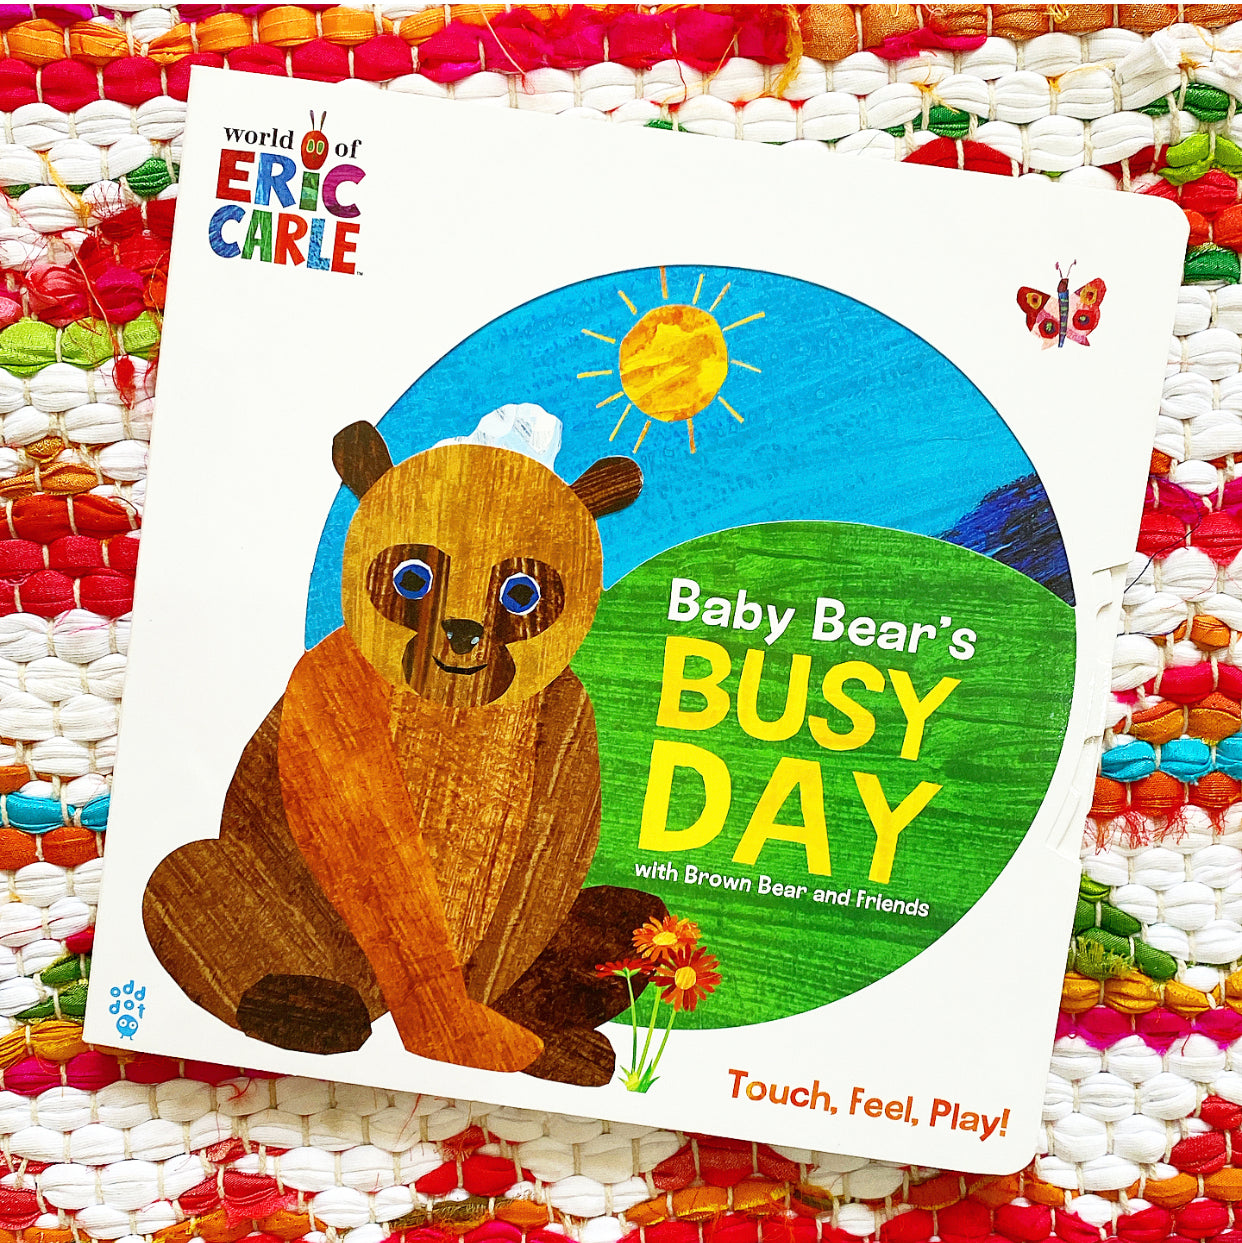 of　Busy　Friends　Brown　Bear　Kind　Bear's　with　Brave　and　Carle)　–　(World　Eric　Day　Baby　Bookshop